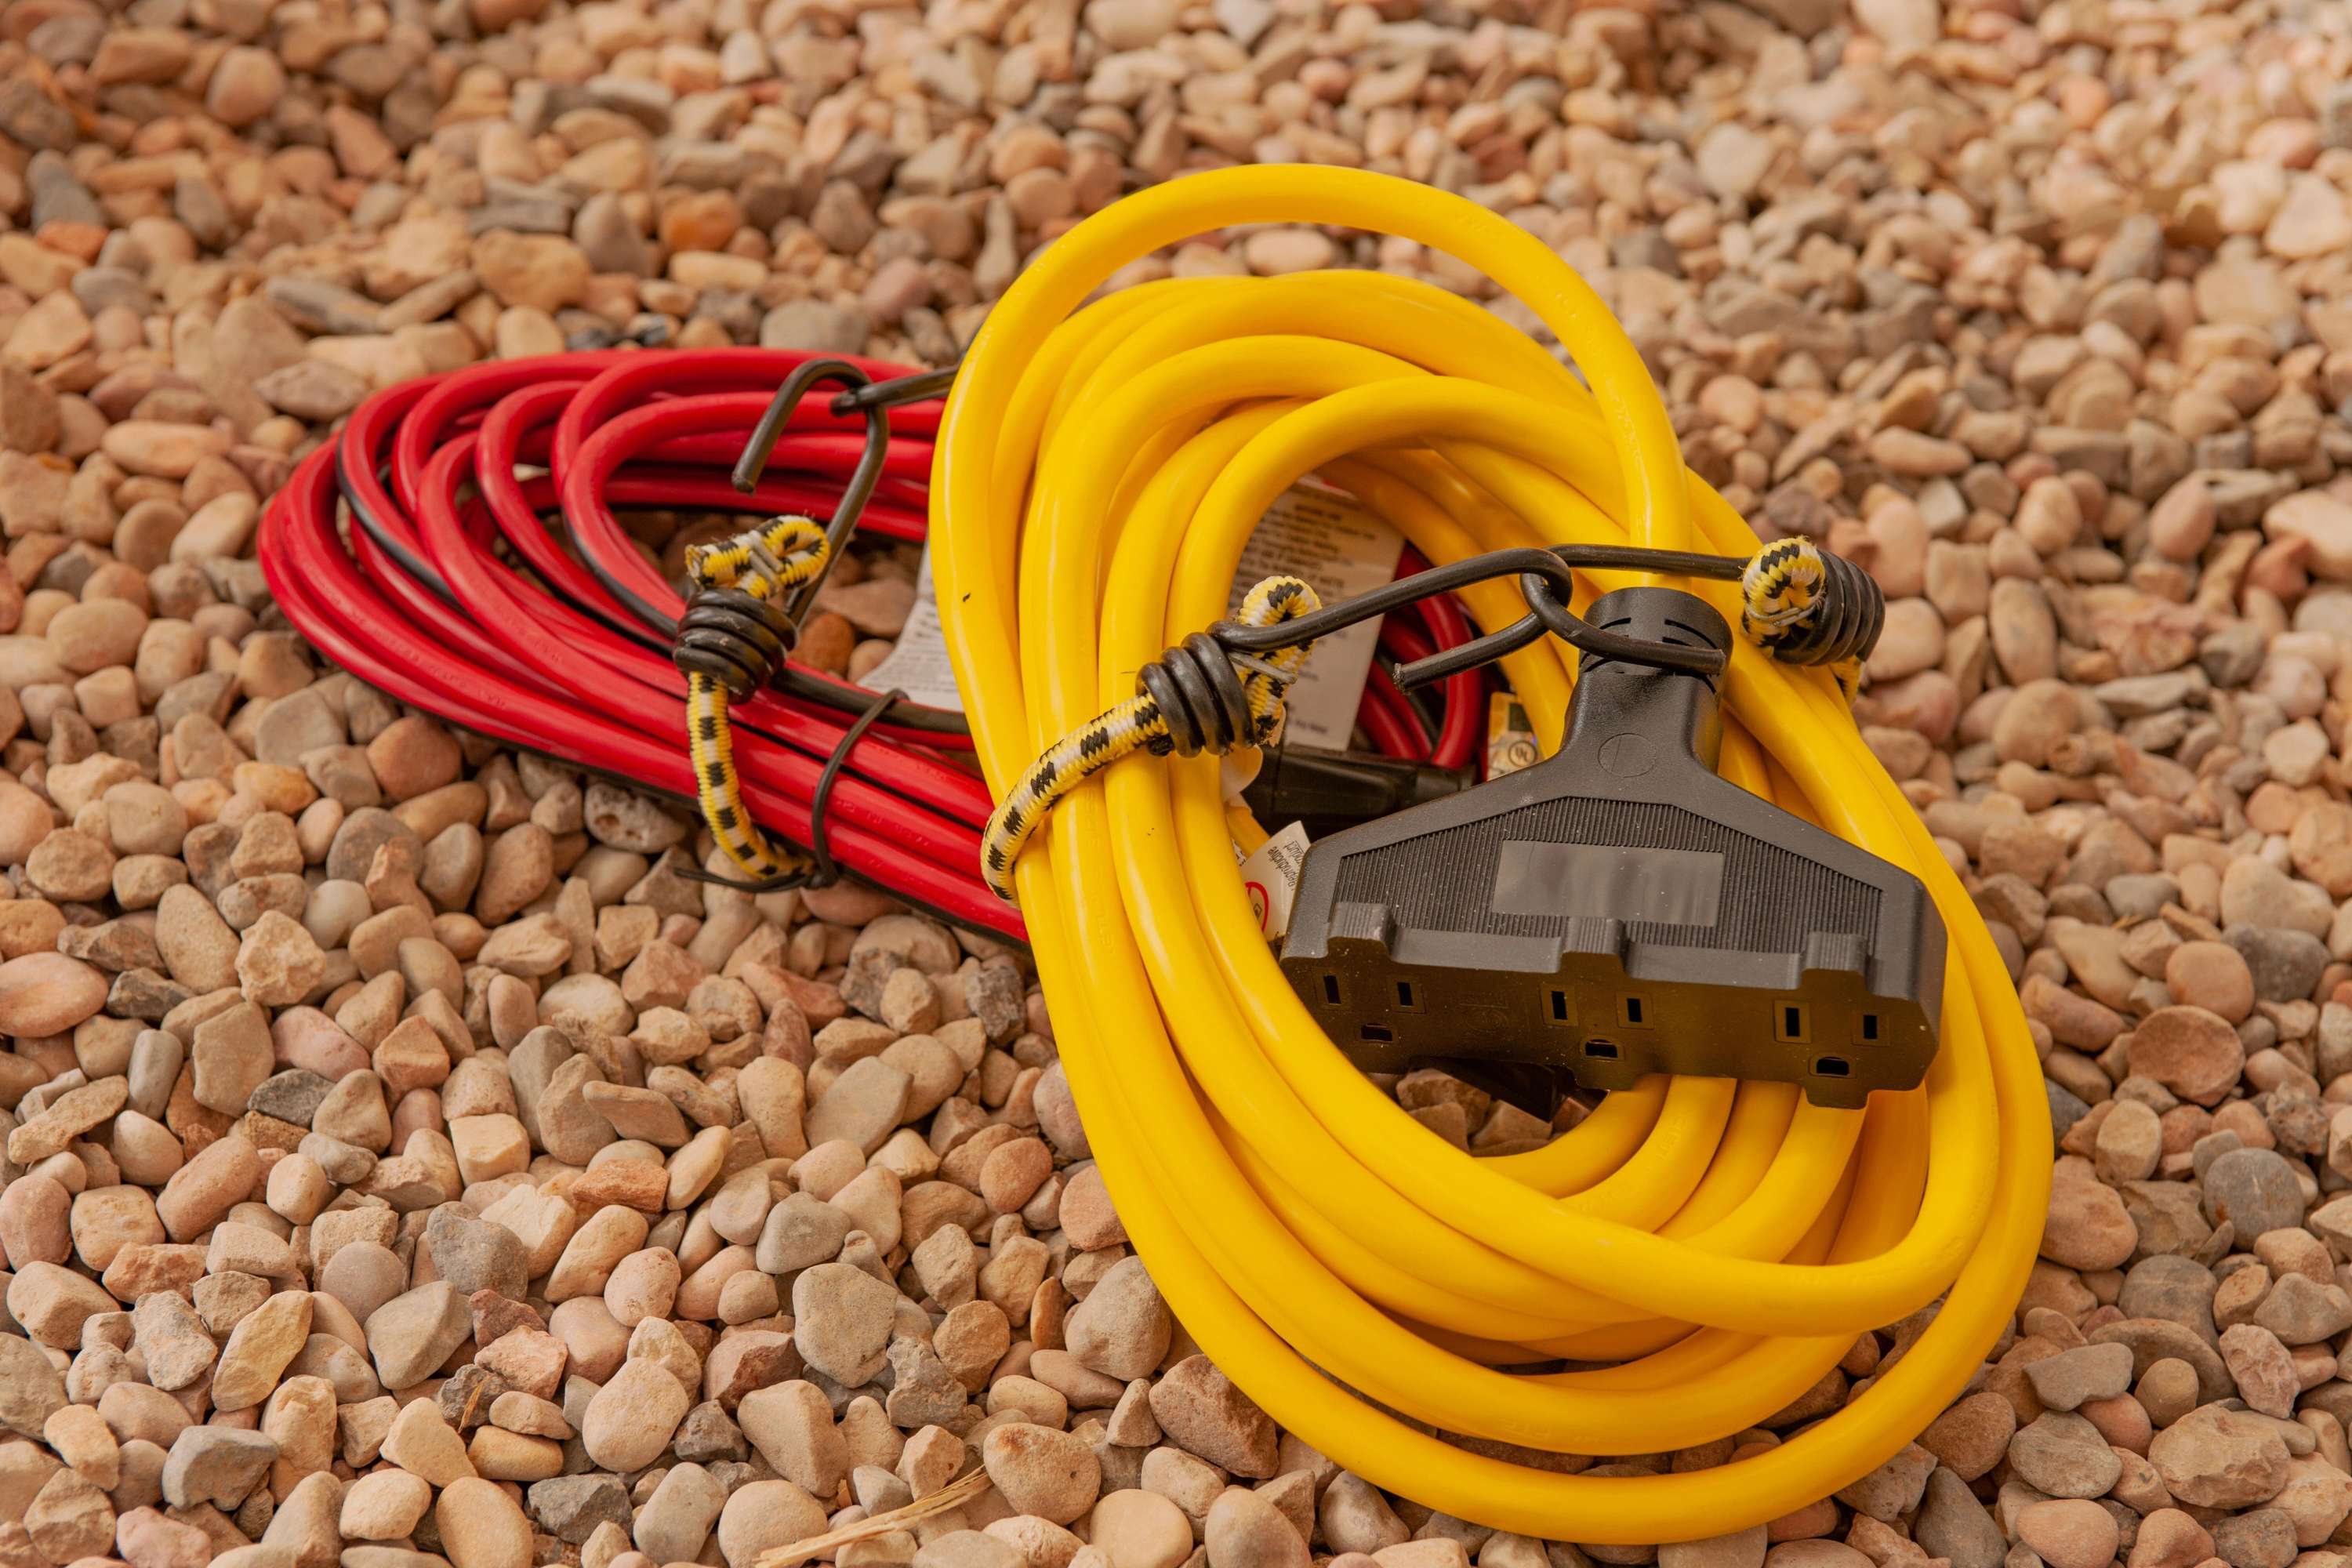 13" Vinyl Coated Bungee Cord variant image view